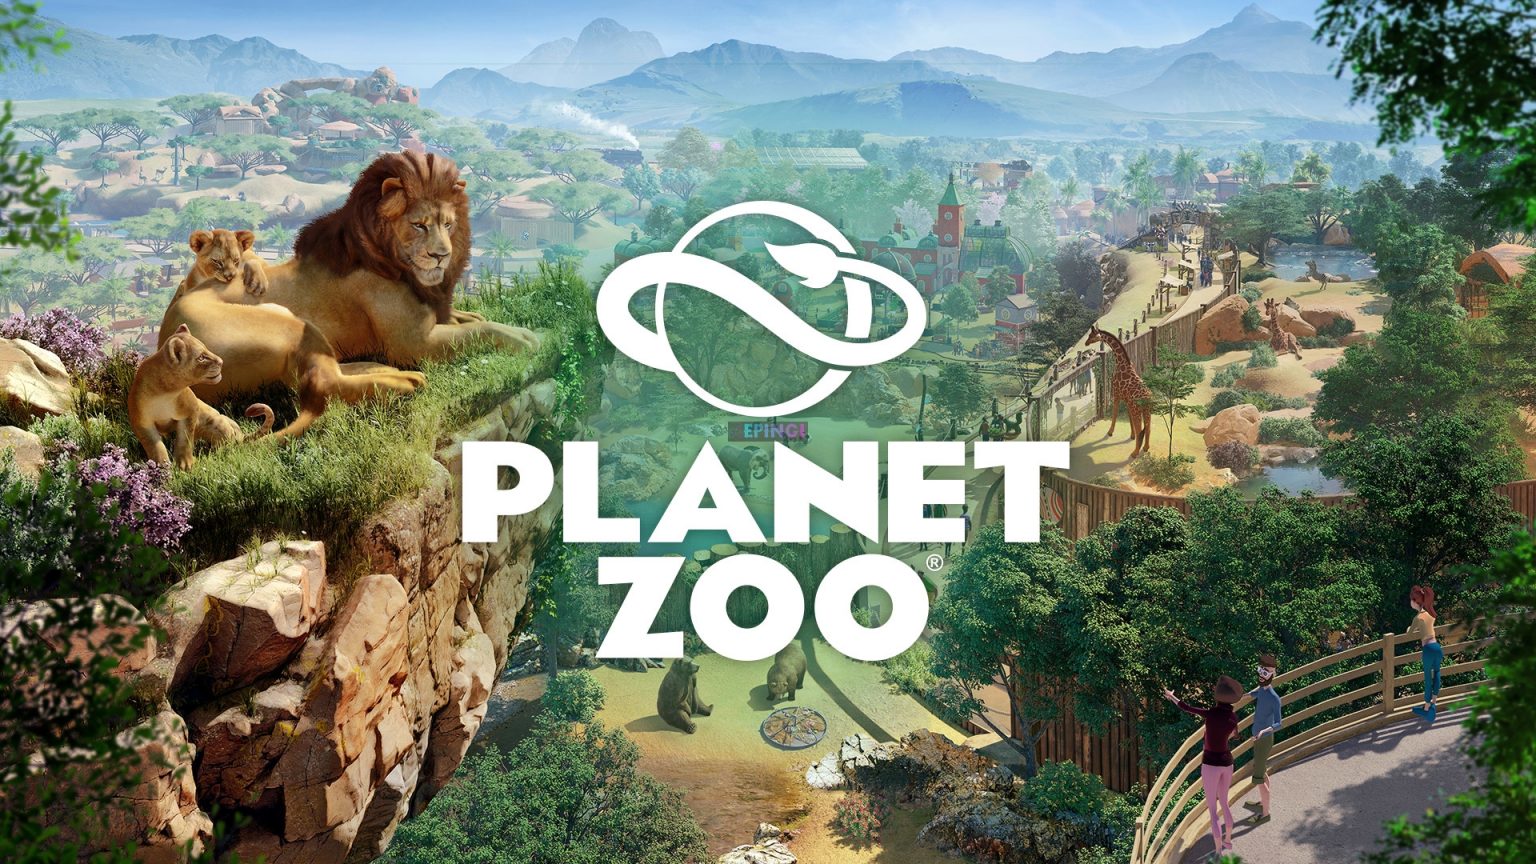 Planet Zoo Android APK & iOS Latest Version Free Download ...